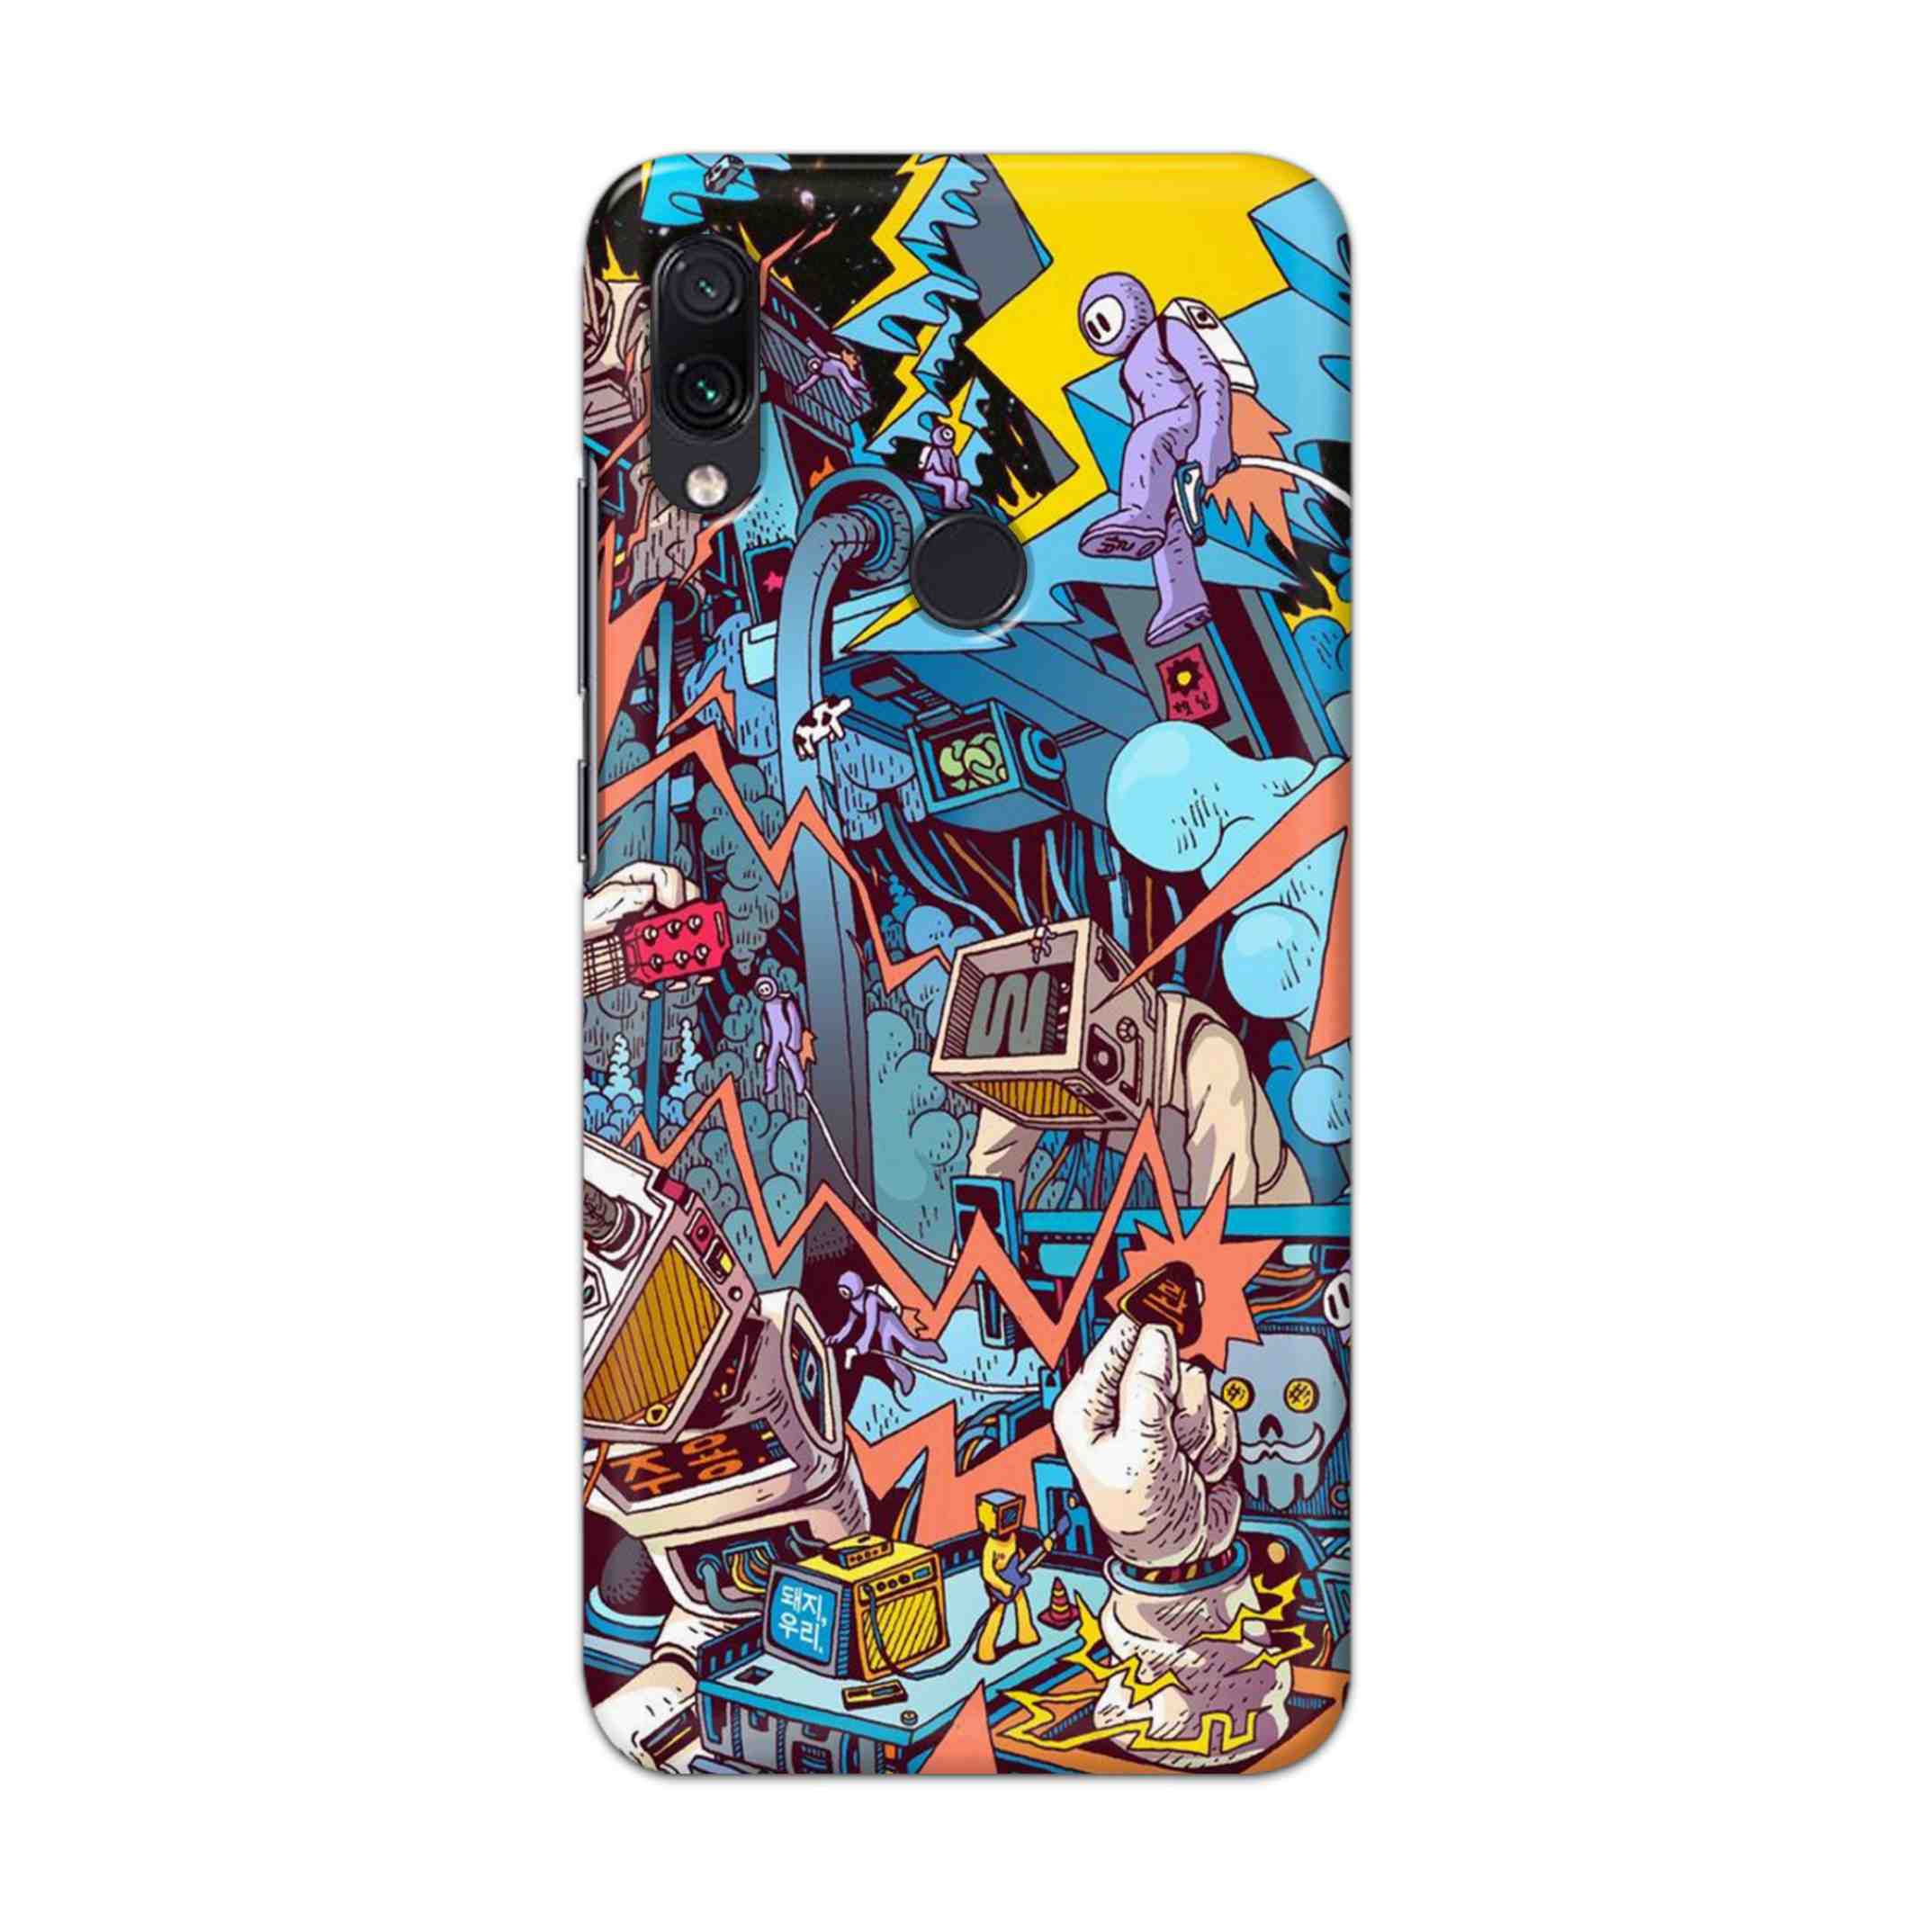 Buy Ofo Panic Hard Back Mobile Phone Case Cover For Redmi Note 7 / Note 7 Pro Online